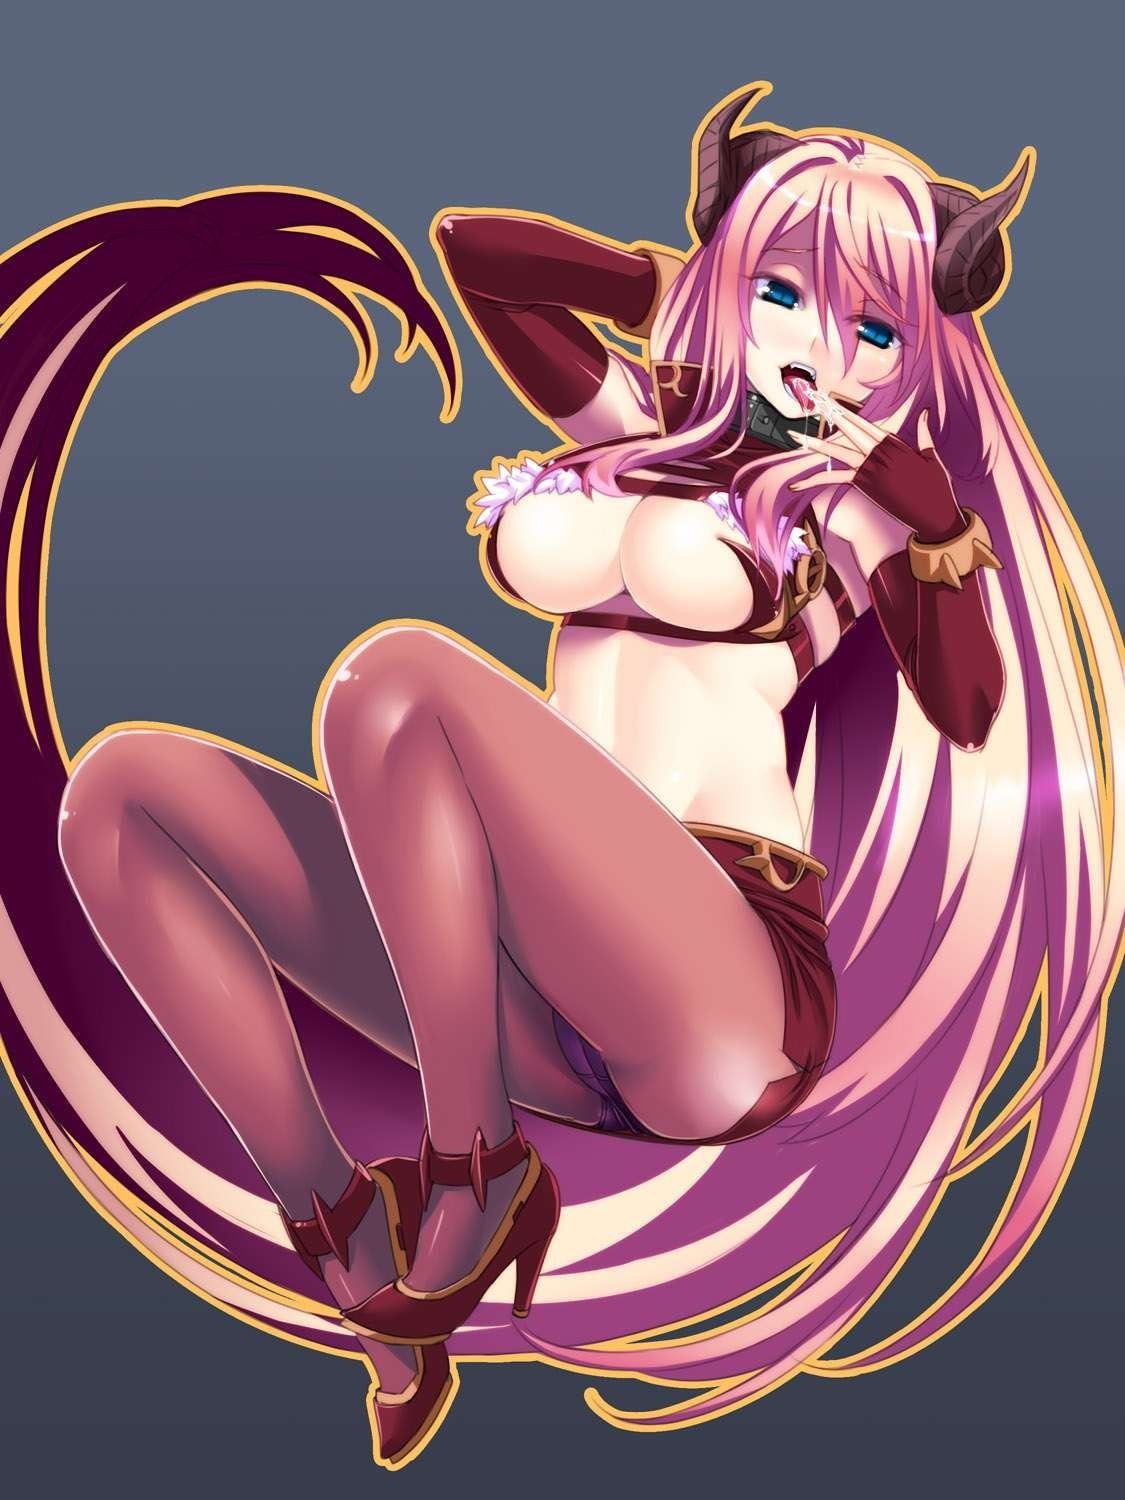 Like attacked by night! Sister of demon succubus hentai images vol.4 16